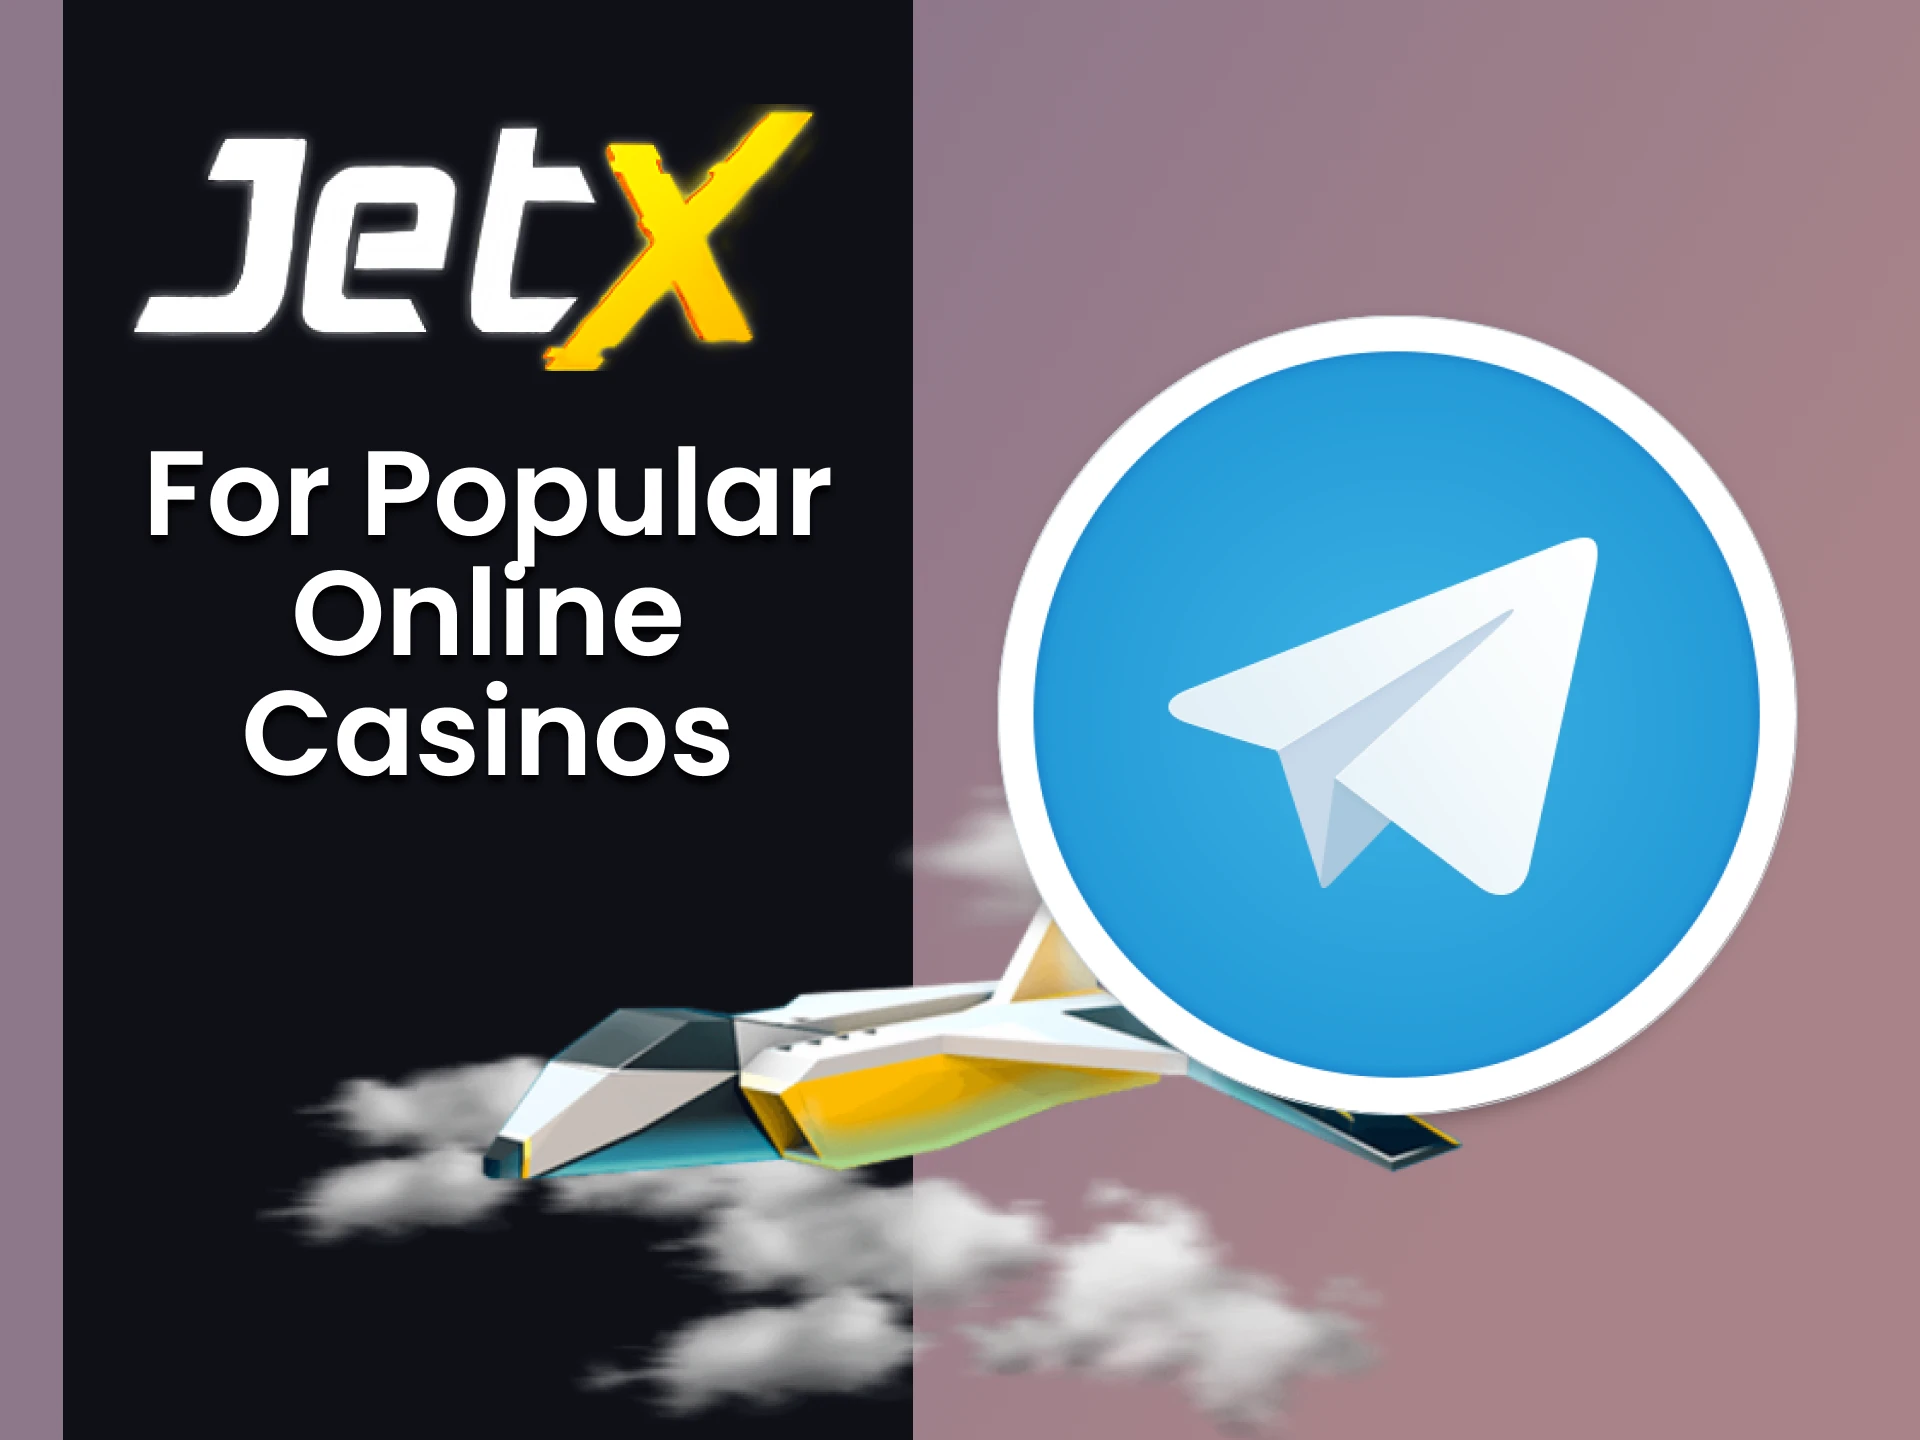 We will tell you for which popular services you can use signals for JetX.